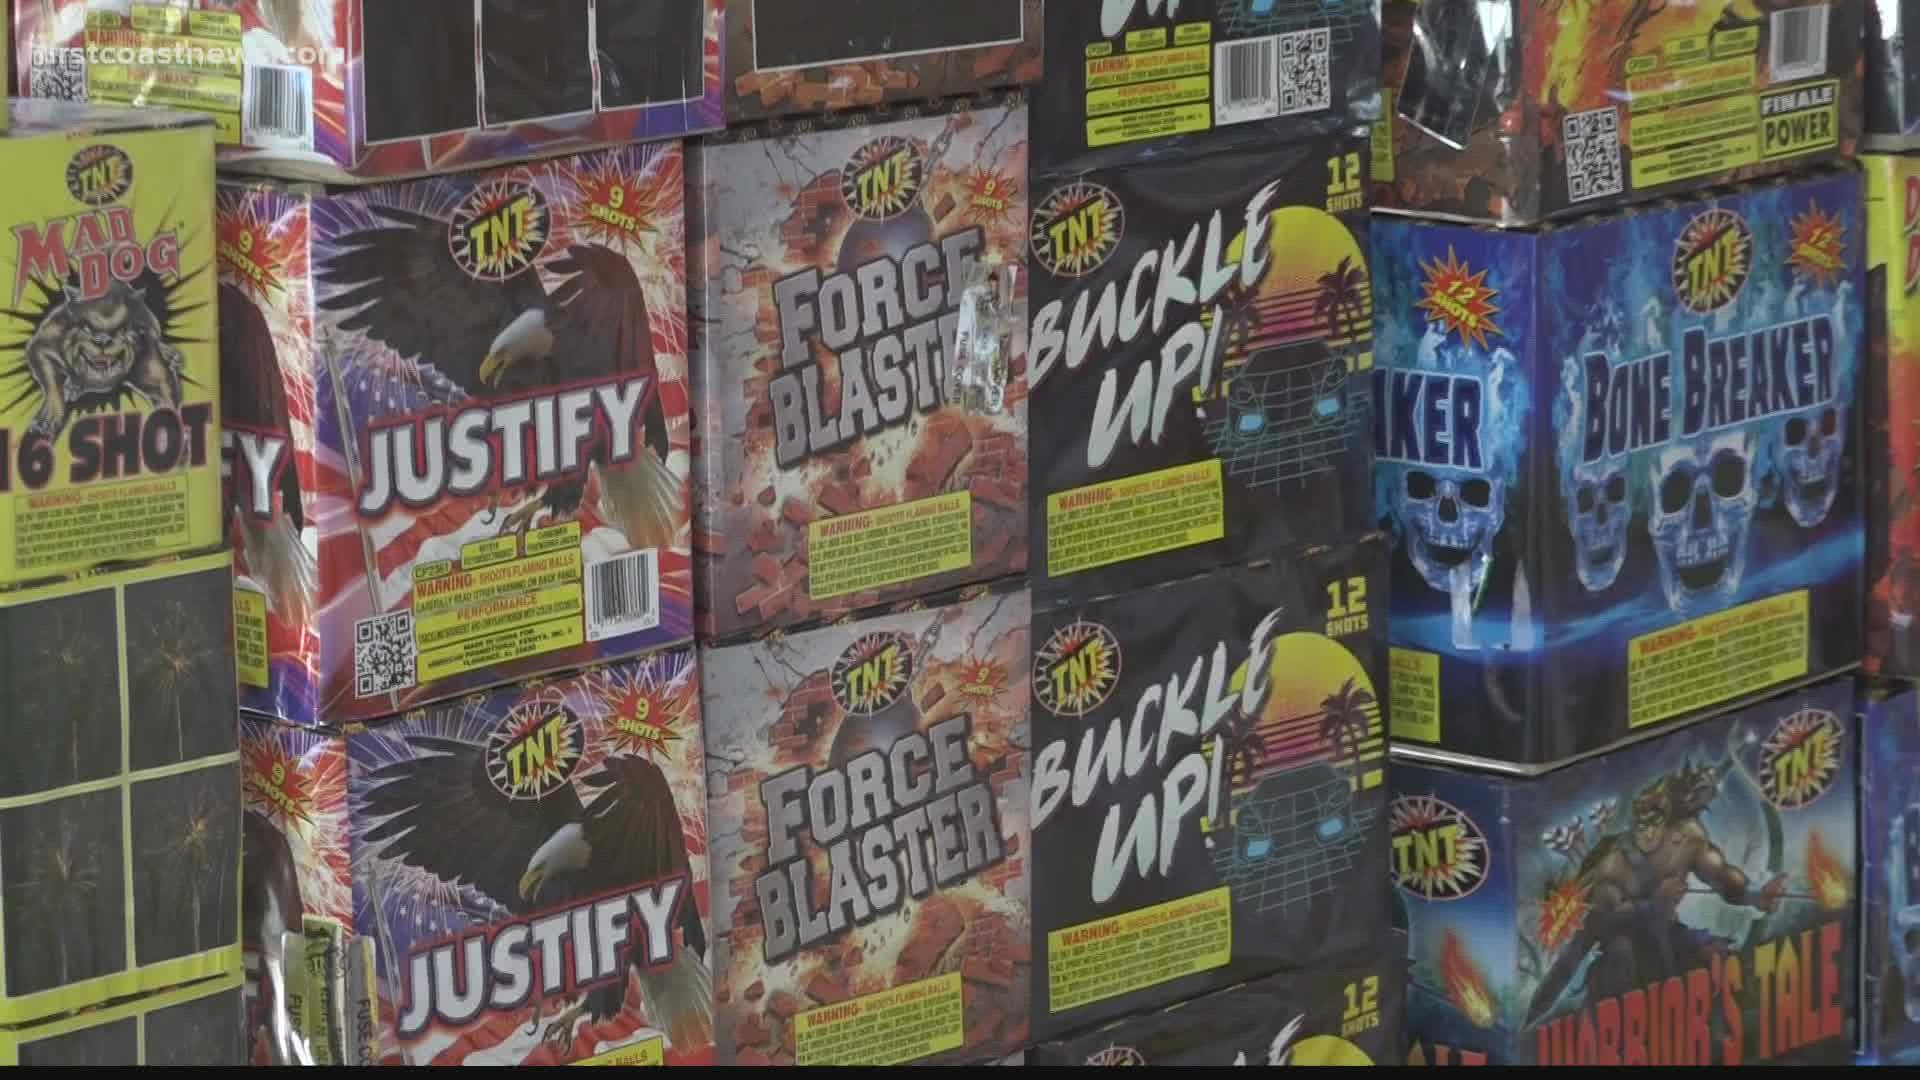 Fireworks sellers say there is a higher demand than in years past due to the spike in COVID-19 cases.